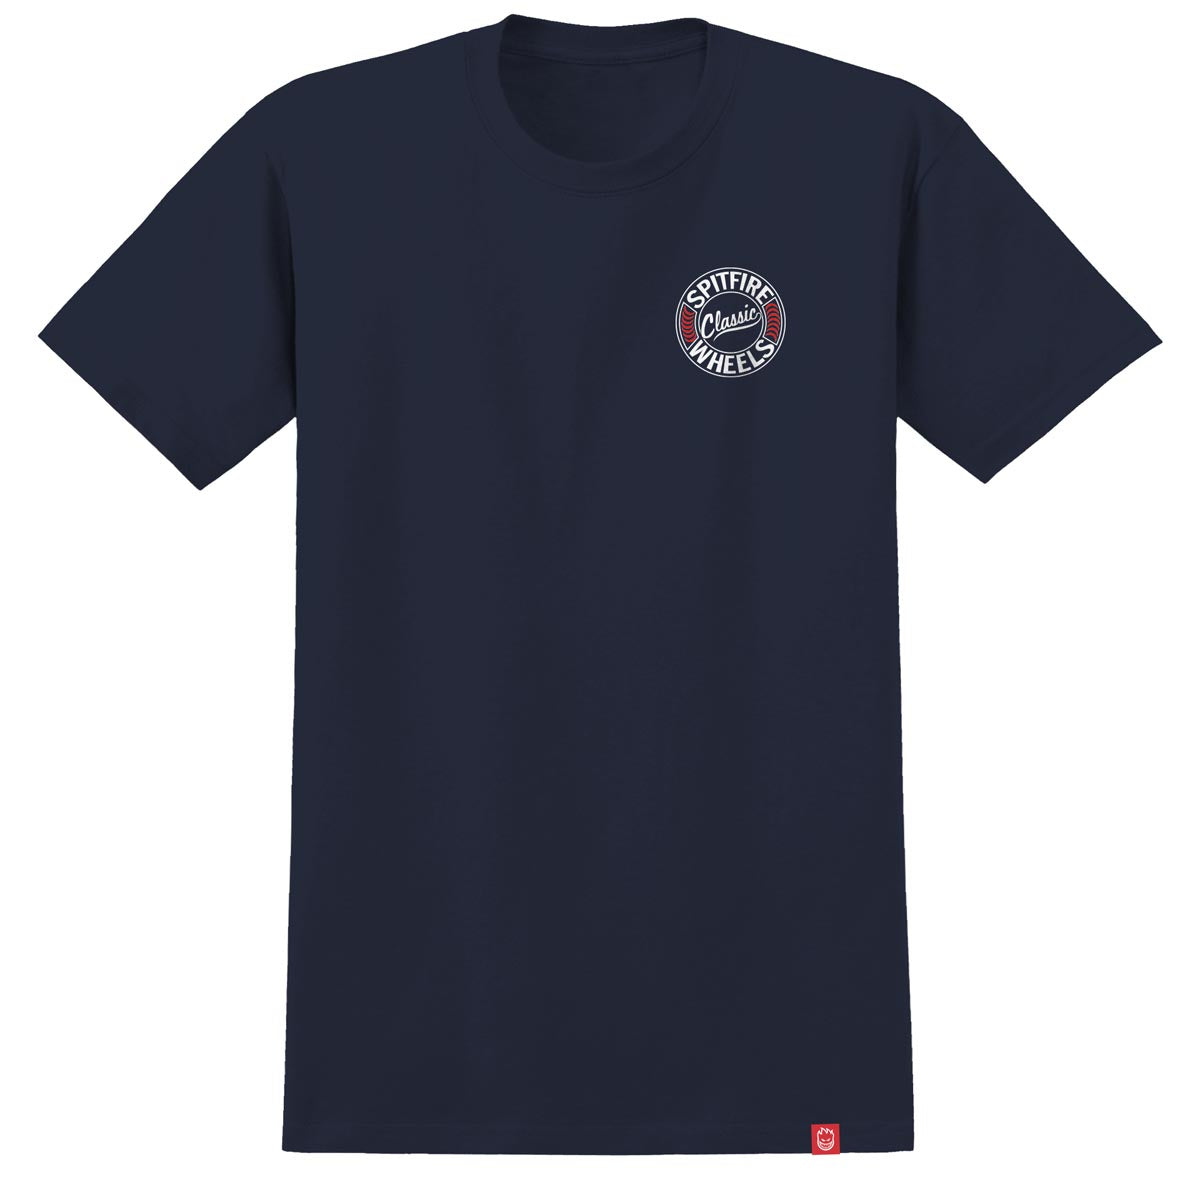 Spitfire Youth Flying Classic T-Shirt - Navy/White/Red image 2